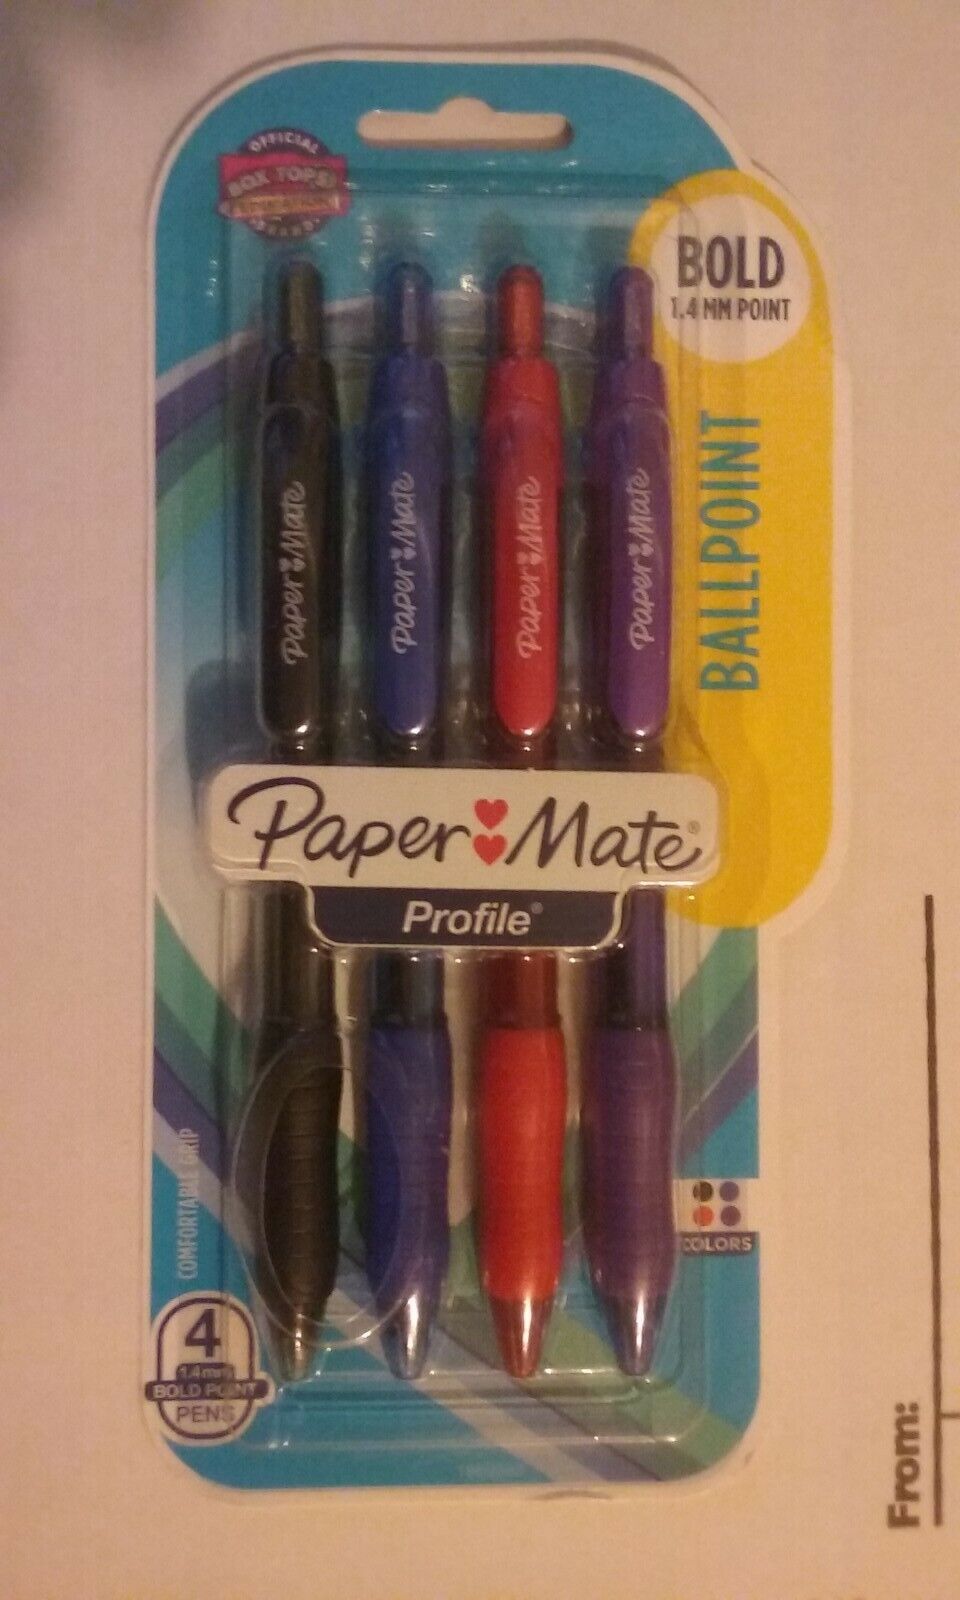 PAPERMATE COMFORTABLE GRIP 1.4 mm  BOLD  POINT  PEN  4 pack